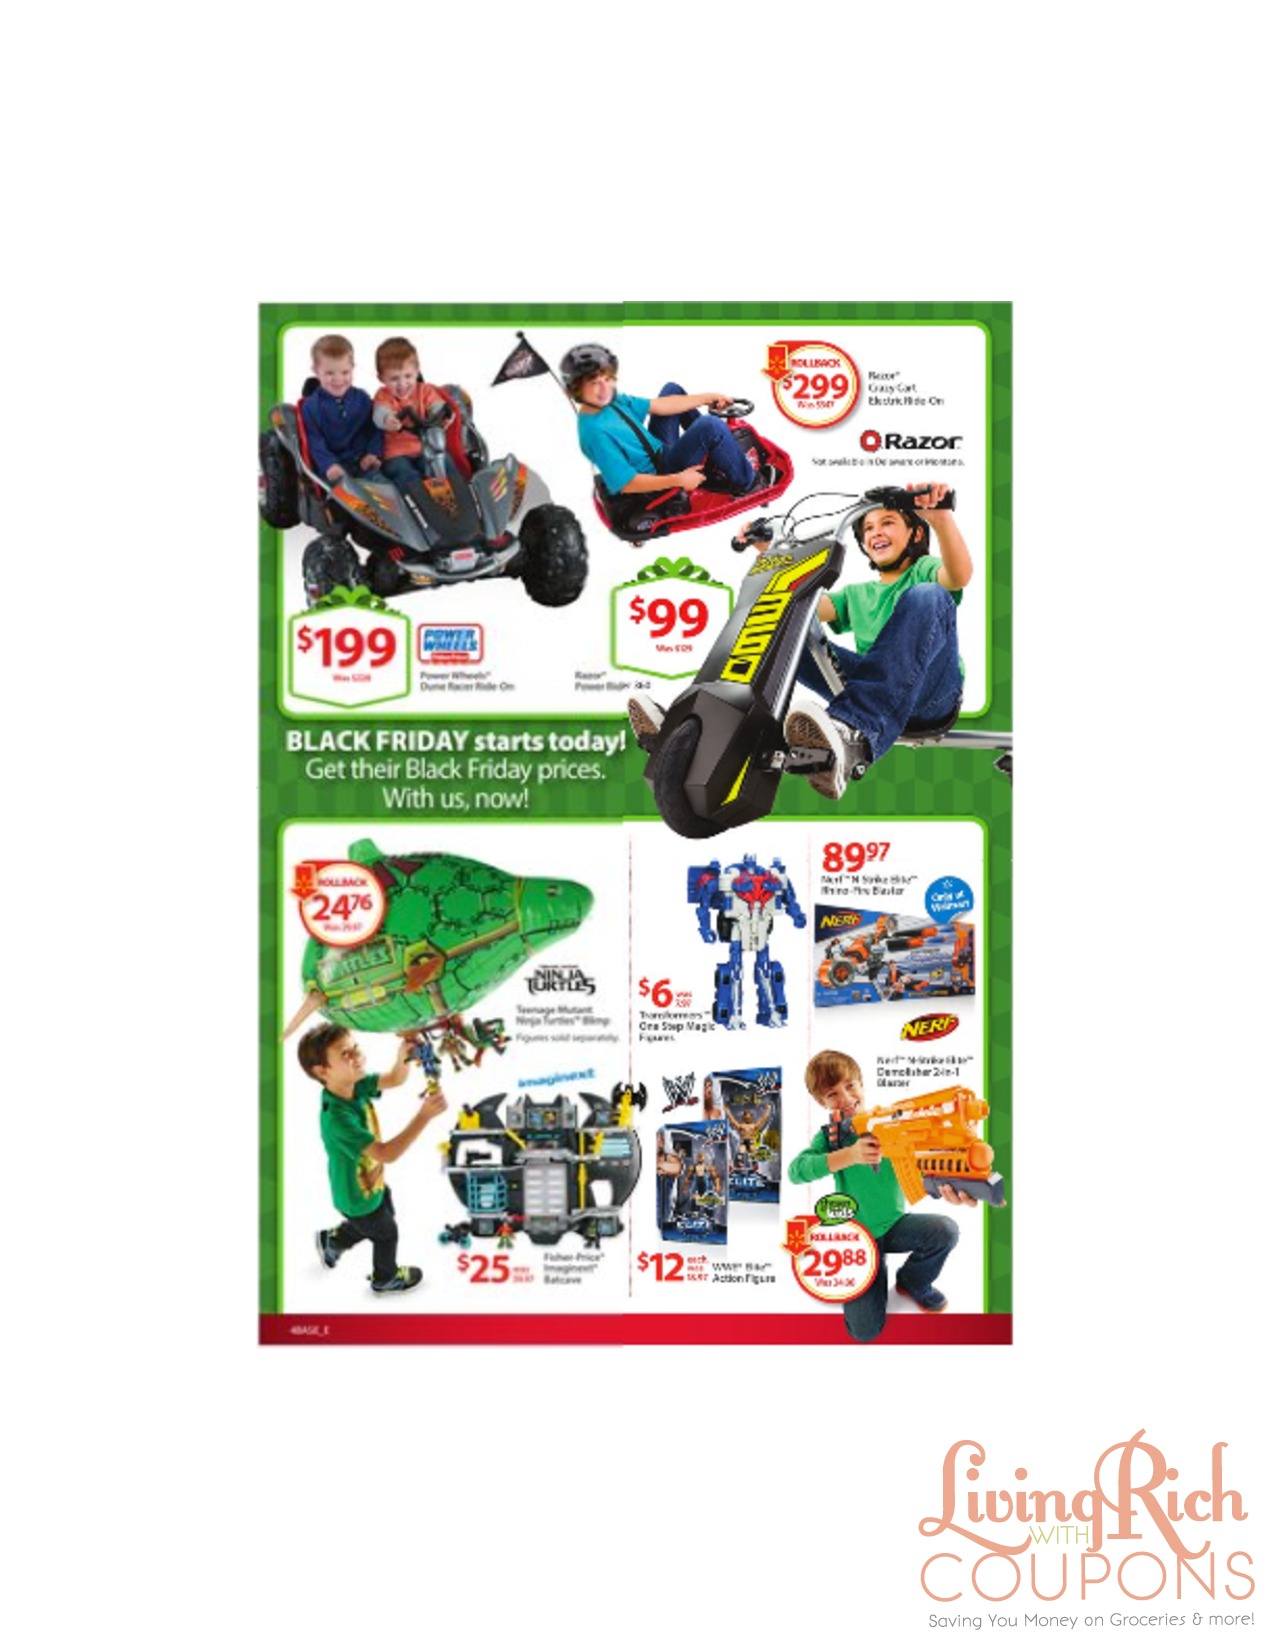 Walmart Black Friday 2014 - Black Friday Ads -Living Rich With Coupons®